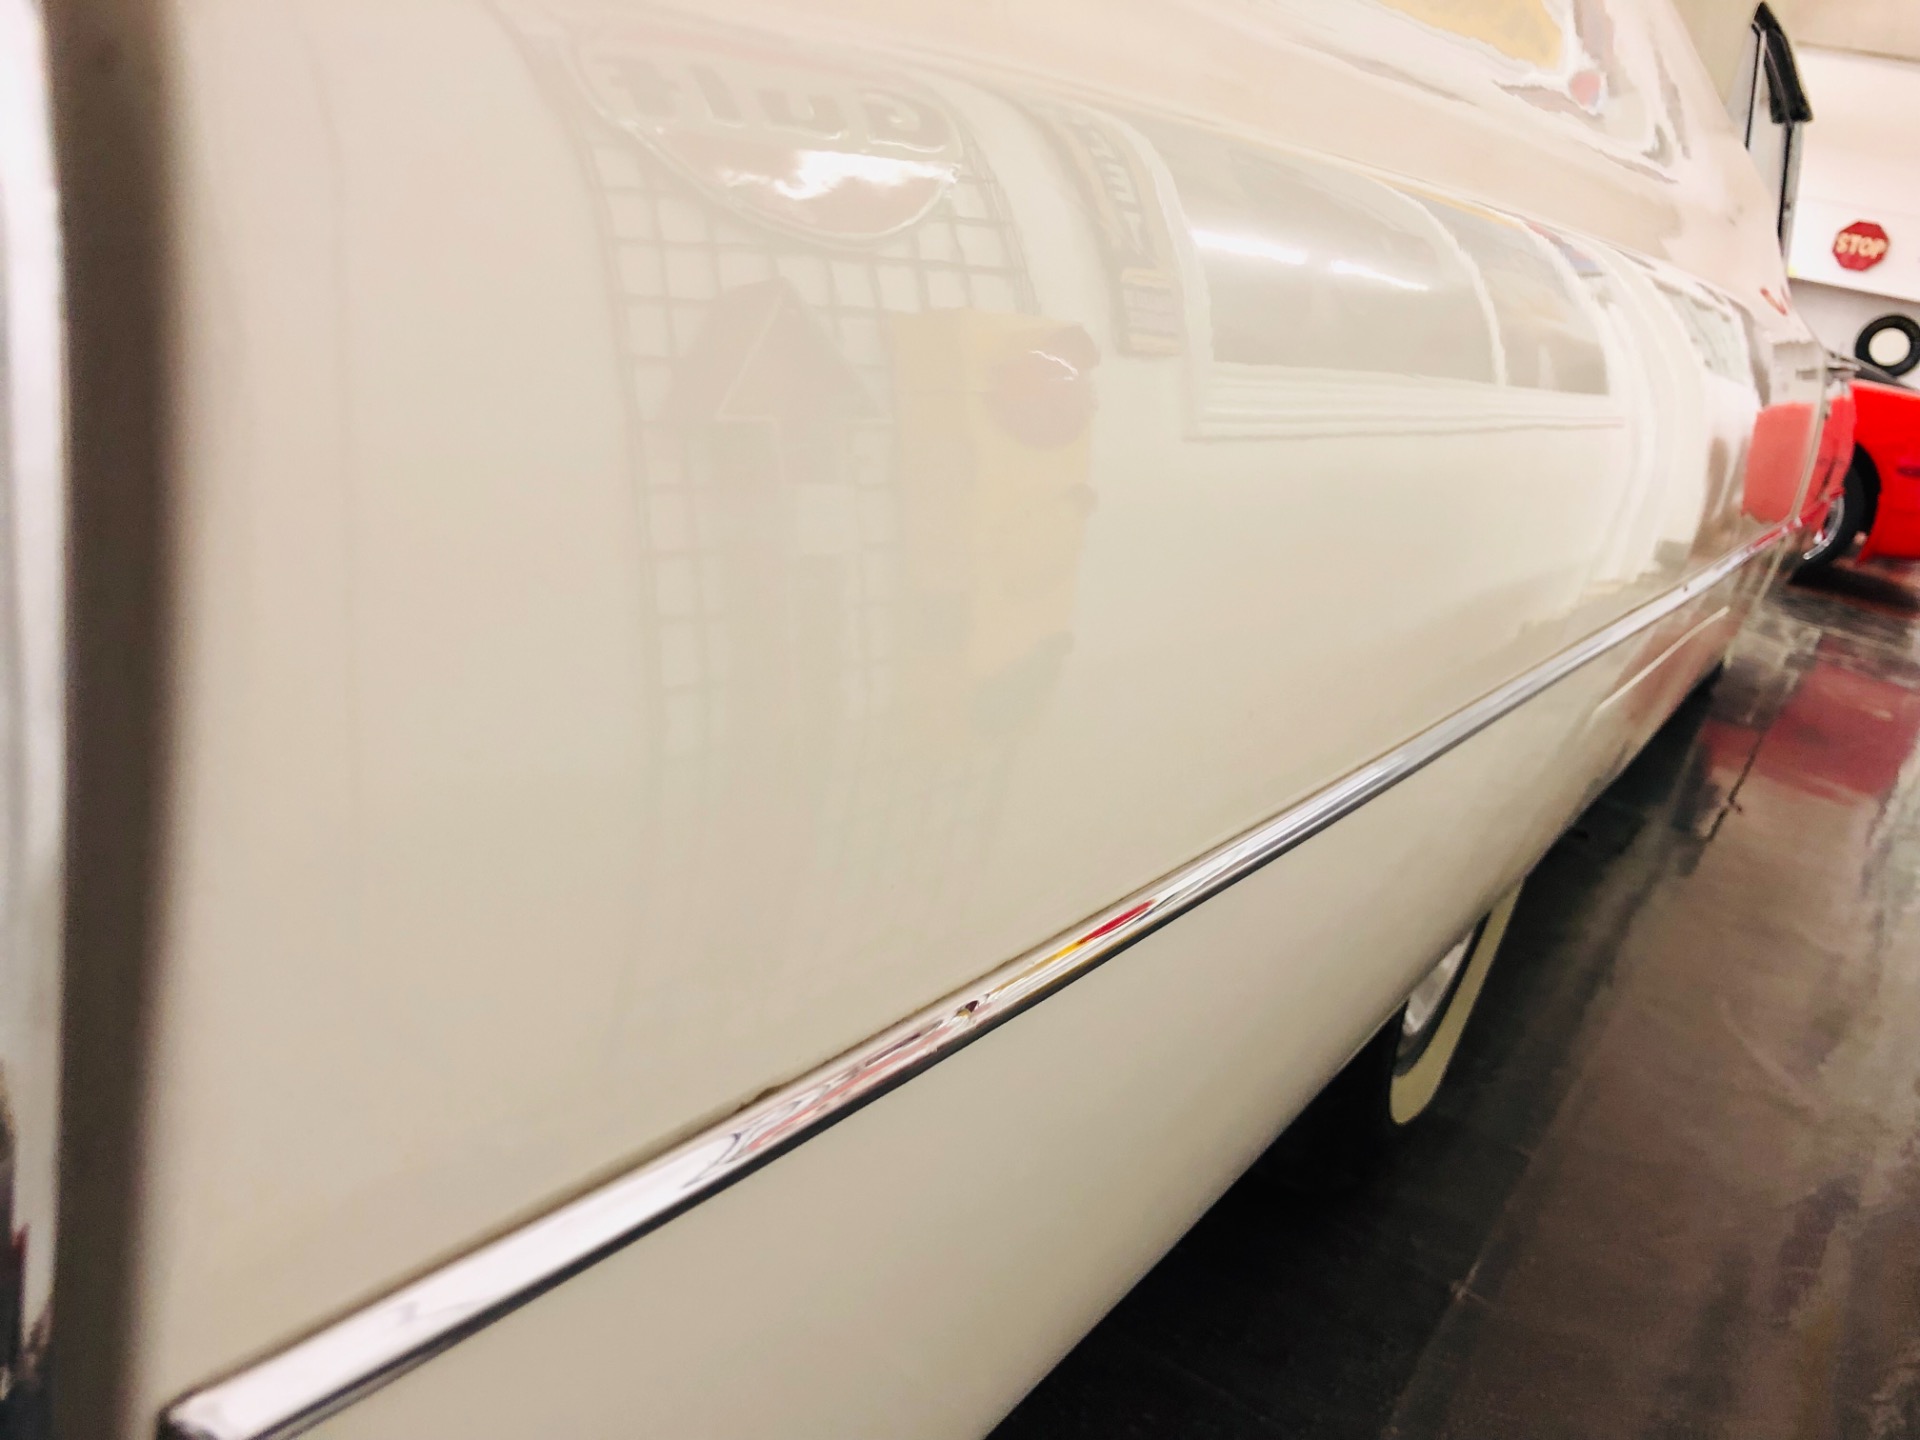 Used 1963 Cadillac DeVille -FRAME OFF RESTORED 2017 CONVERTIBLE FUN-NUMBERS MATCHING- | Mundelein, IL